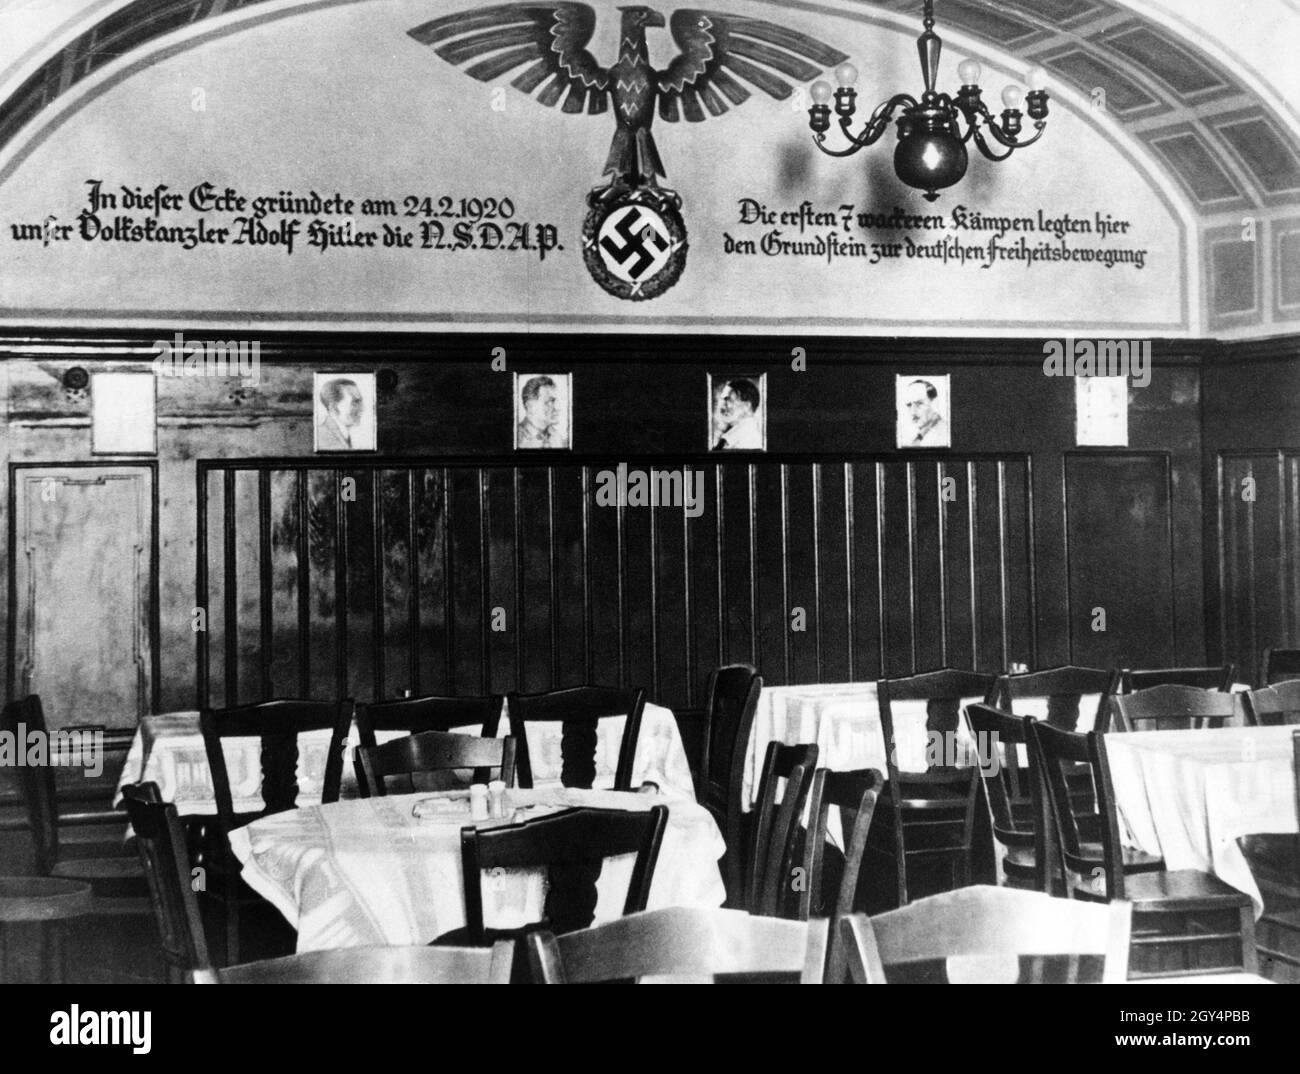 Anton Drexler, Gottfried Feder, Adolf Hitler, Hermann Göring, Hermann Esser, and Dietrich Eckart founded the NSDAP in the Sterneckerbräu in Munich, which can be seen here, as early as 20.02.1920, its proclamation then took place on 24.02 in the Hofbräuhaus. The Sterneckerbräu in Tal 38 served as the NSDAP's first party building and meeting place. [automated translation] Stock Photo